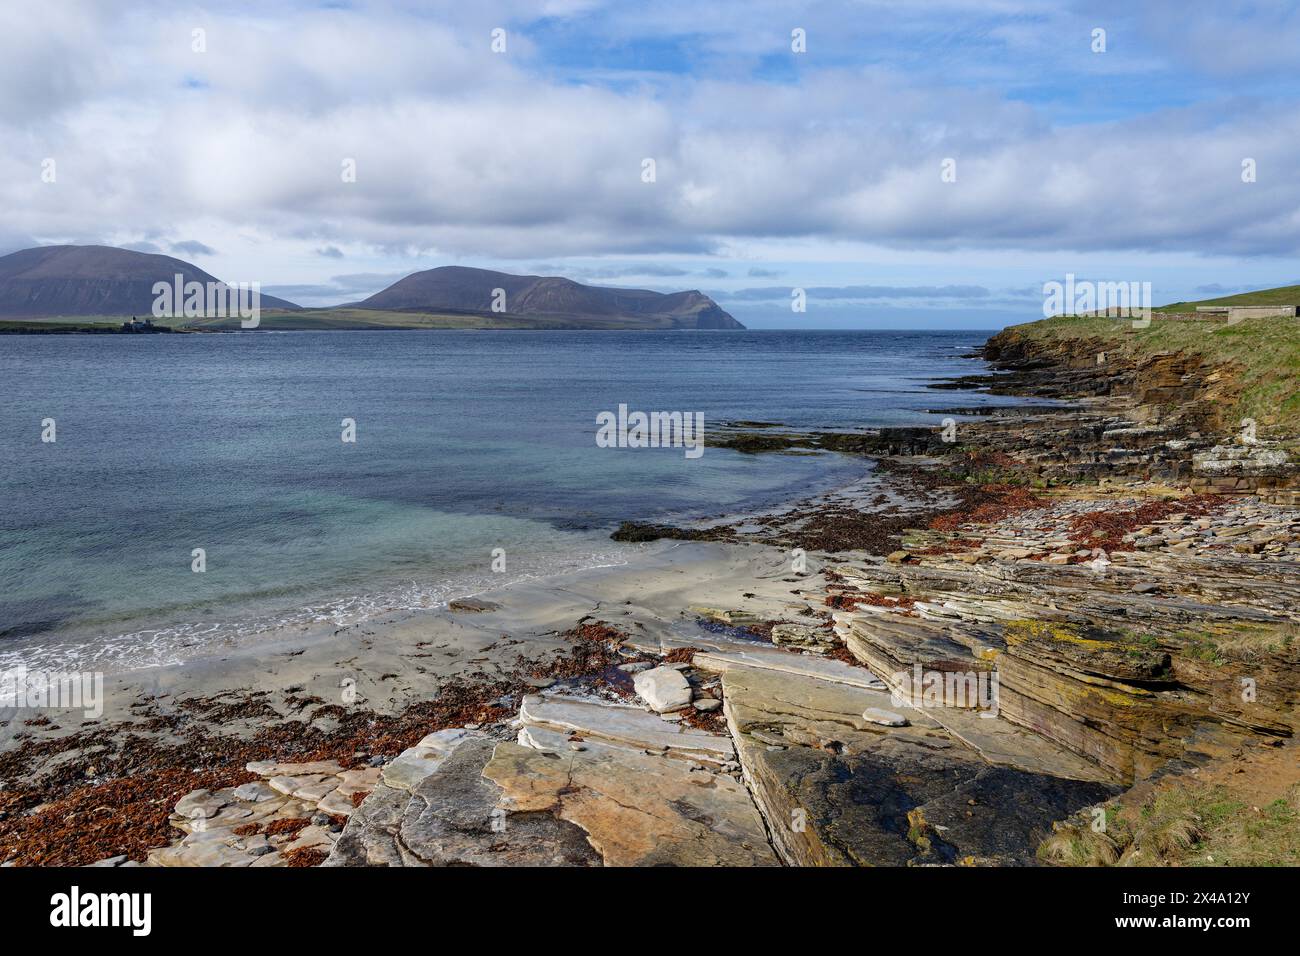 View from Stromness looking out over Hoy Sound shows the lighthouse on Graemsay on the left on onwards to the magnificent hills on the island of Hoy. Stock Photo